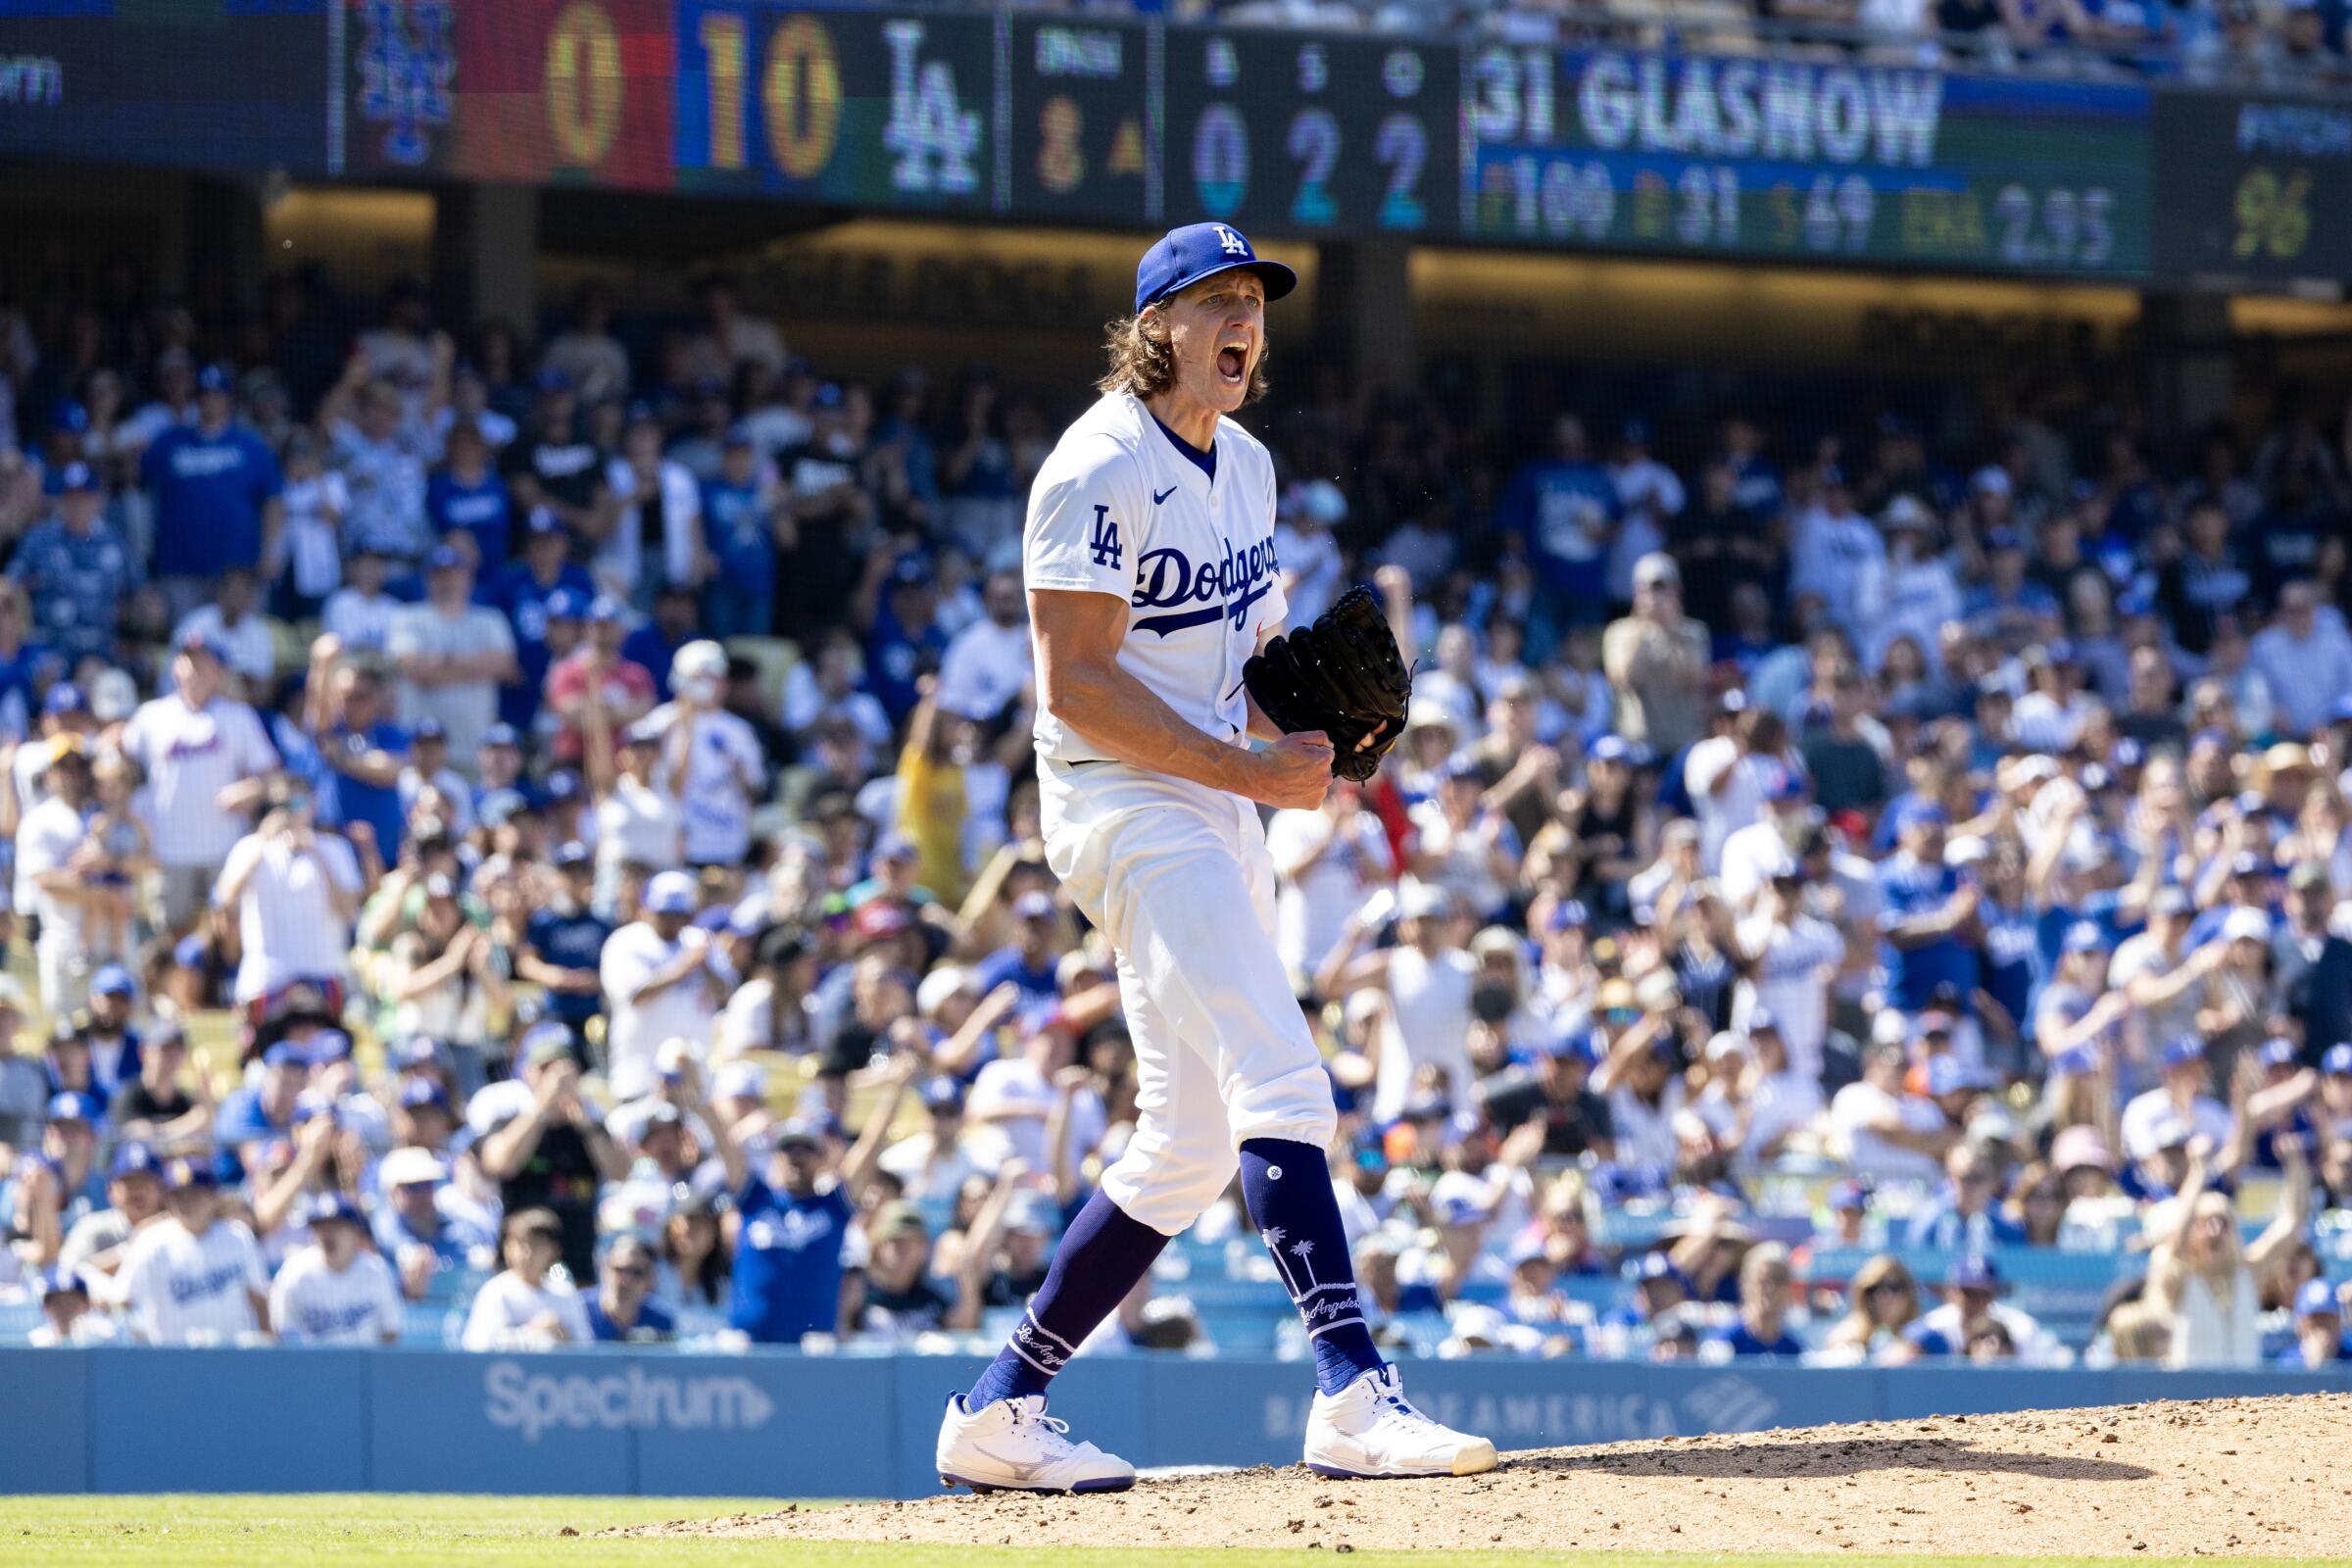 Dodgers starting pitcher Tyler Glasnow celebrates after striking out a batter with the bases loaded in the eighth inning.